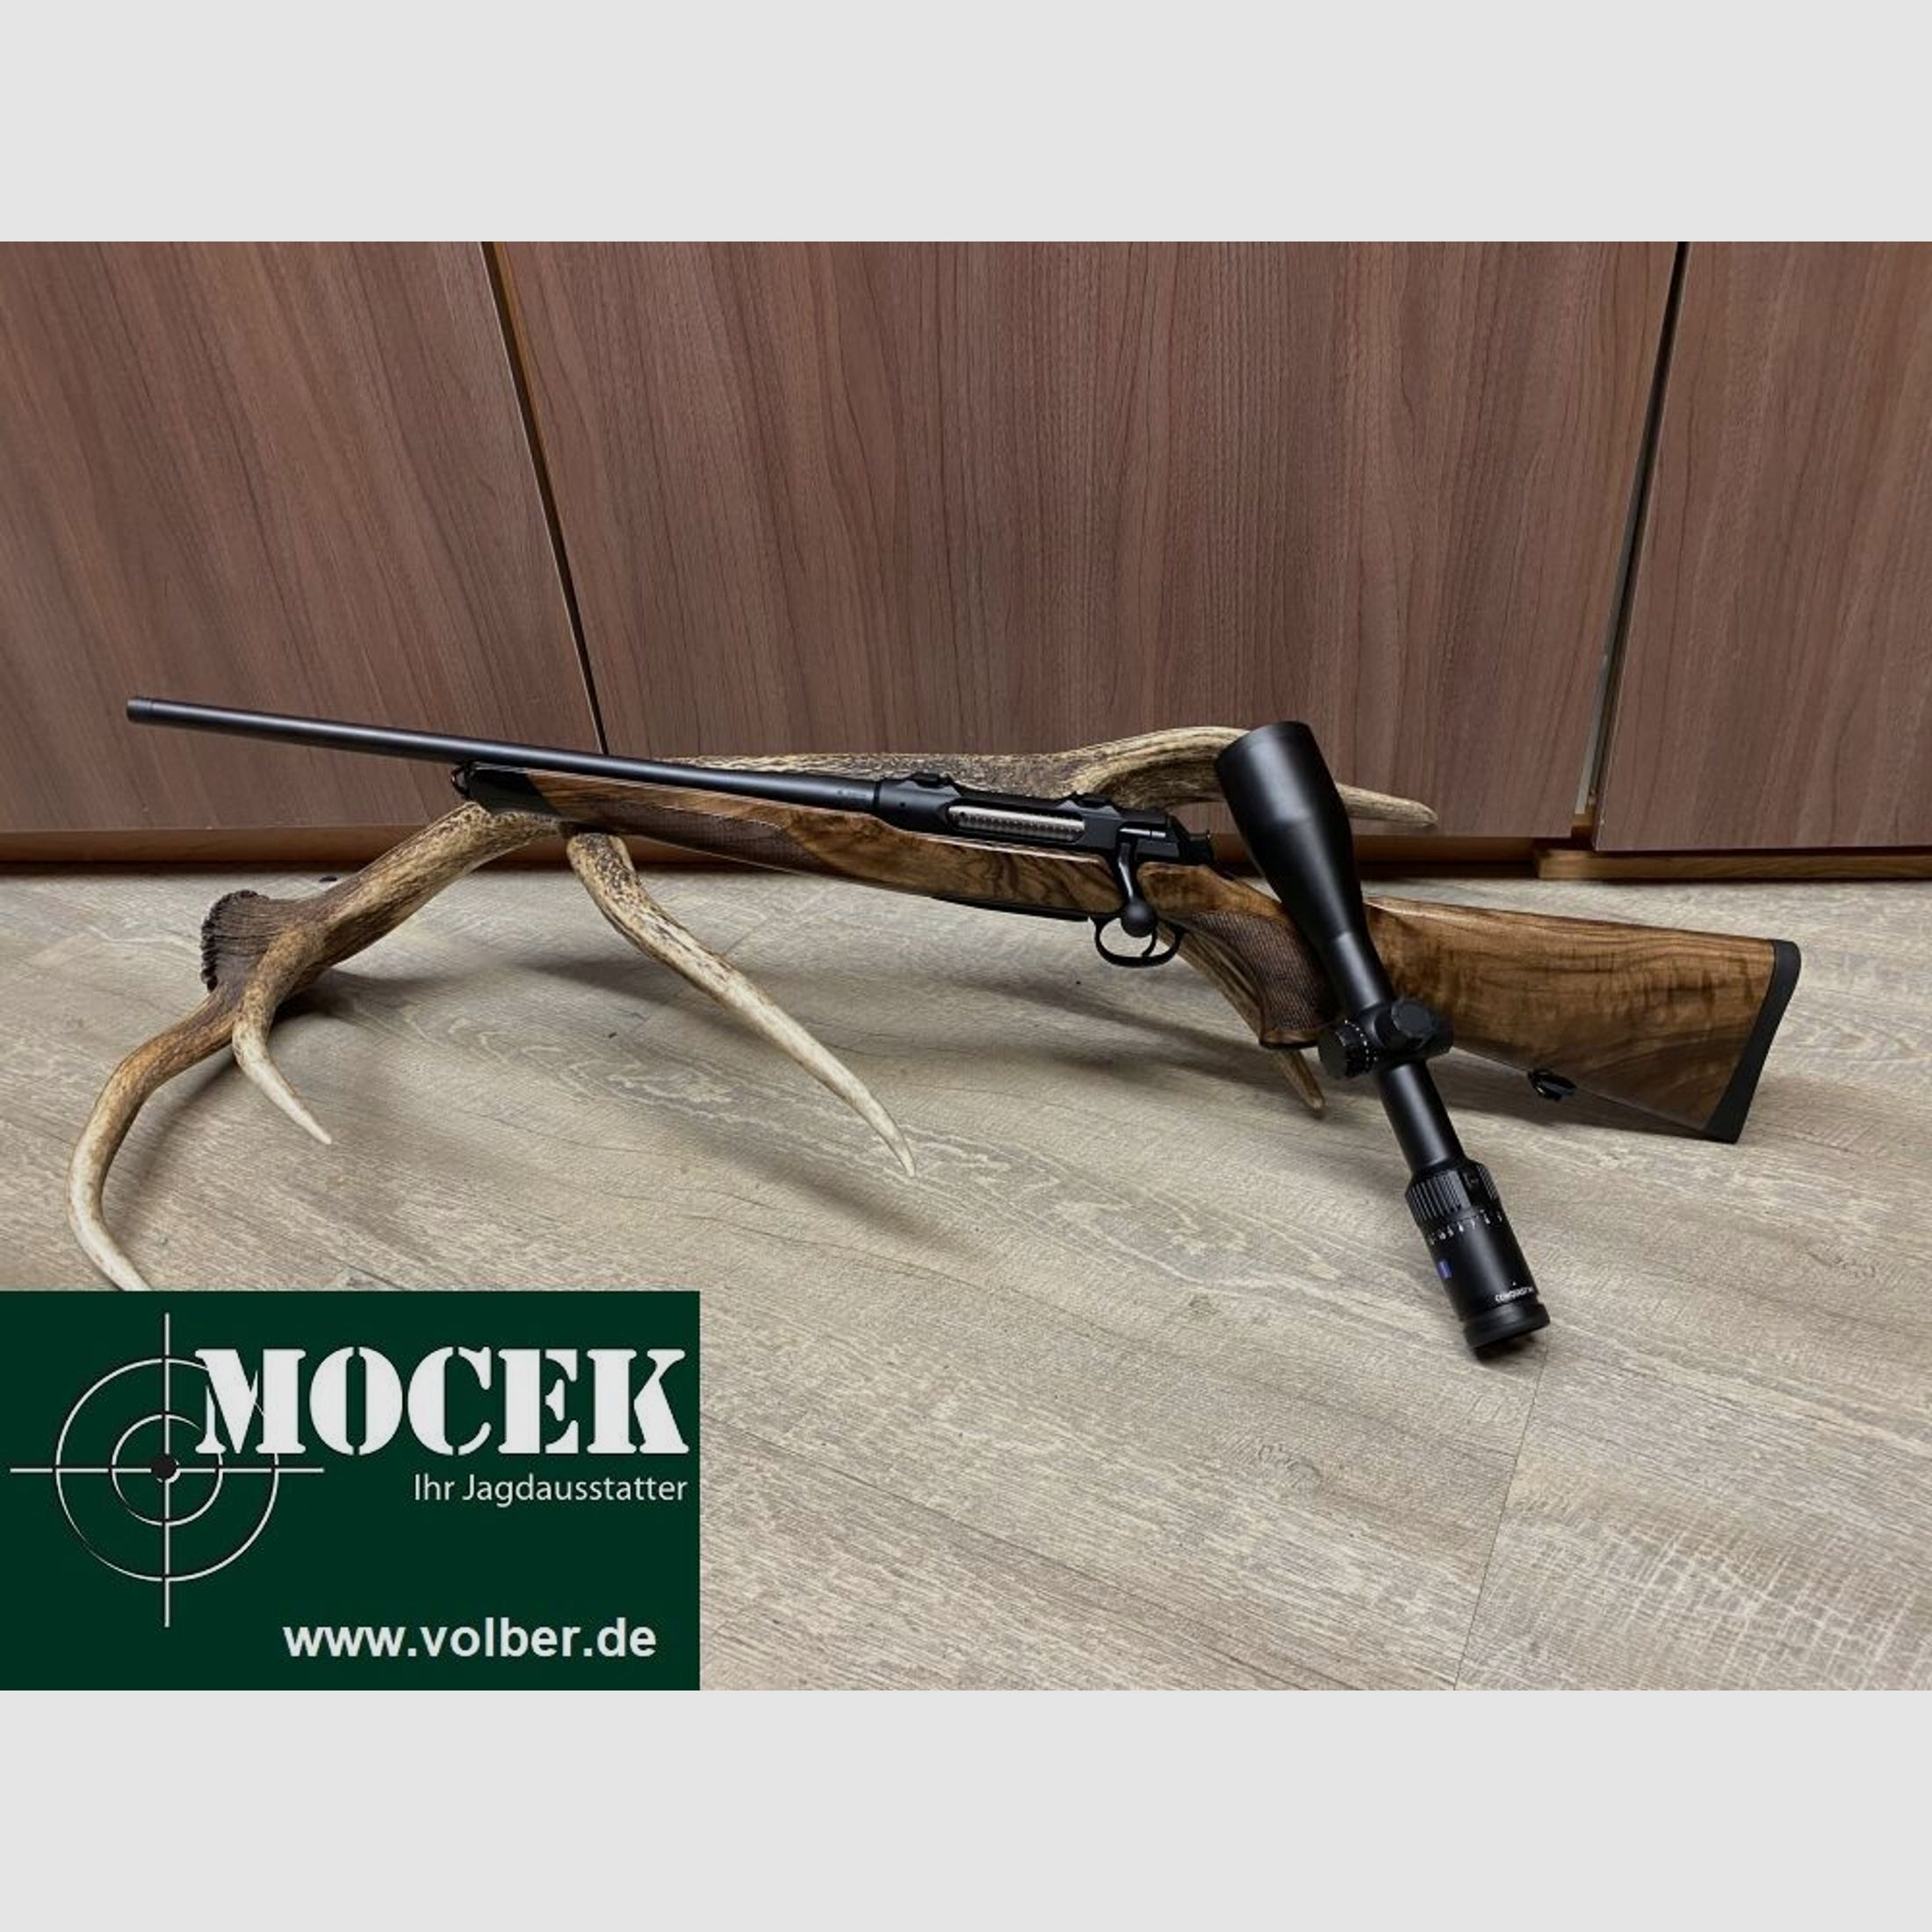 Sauer	 404 Classic links HK4, mit Zeiss Conquest V4 3-12x56